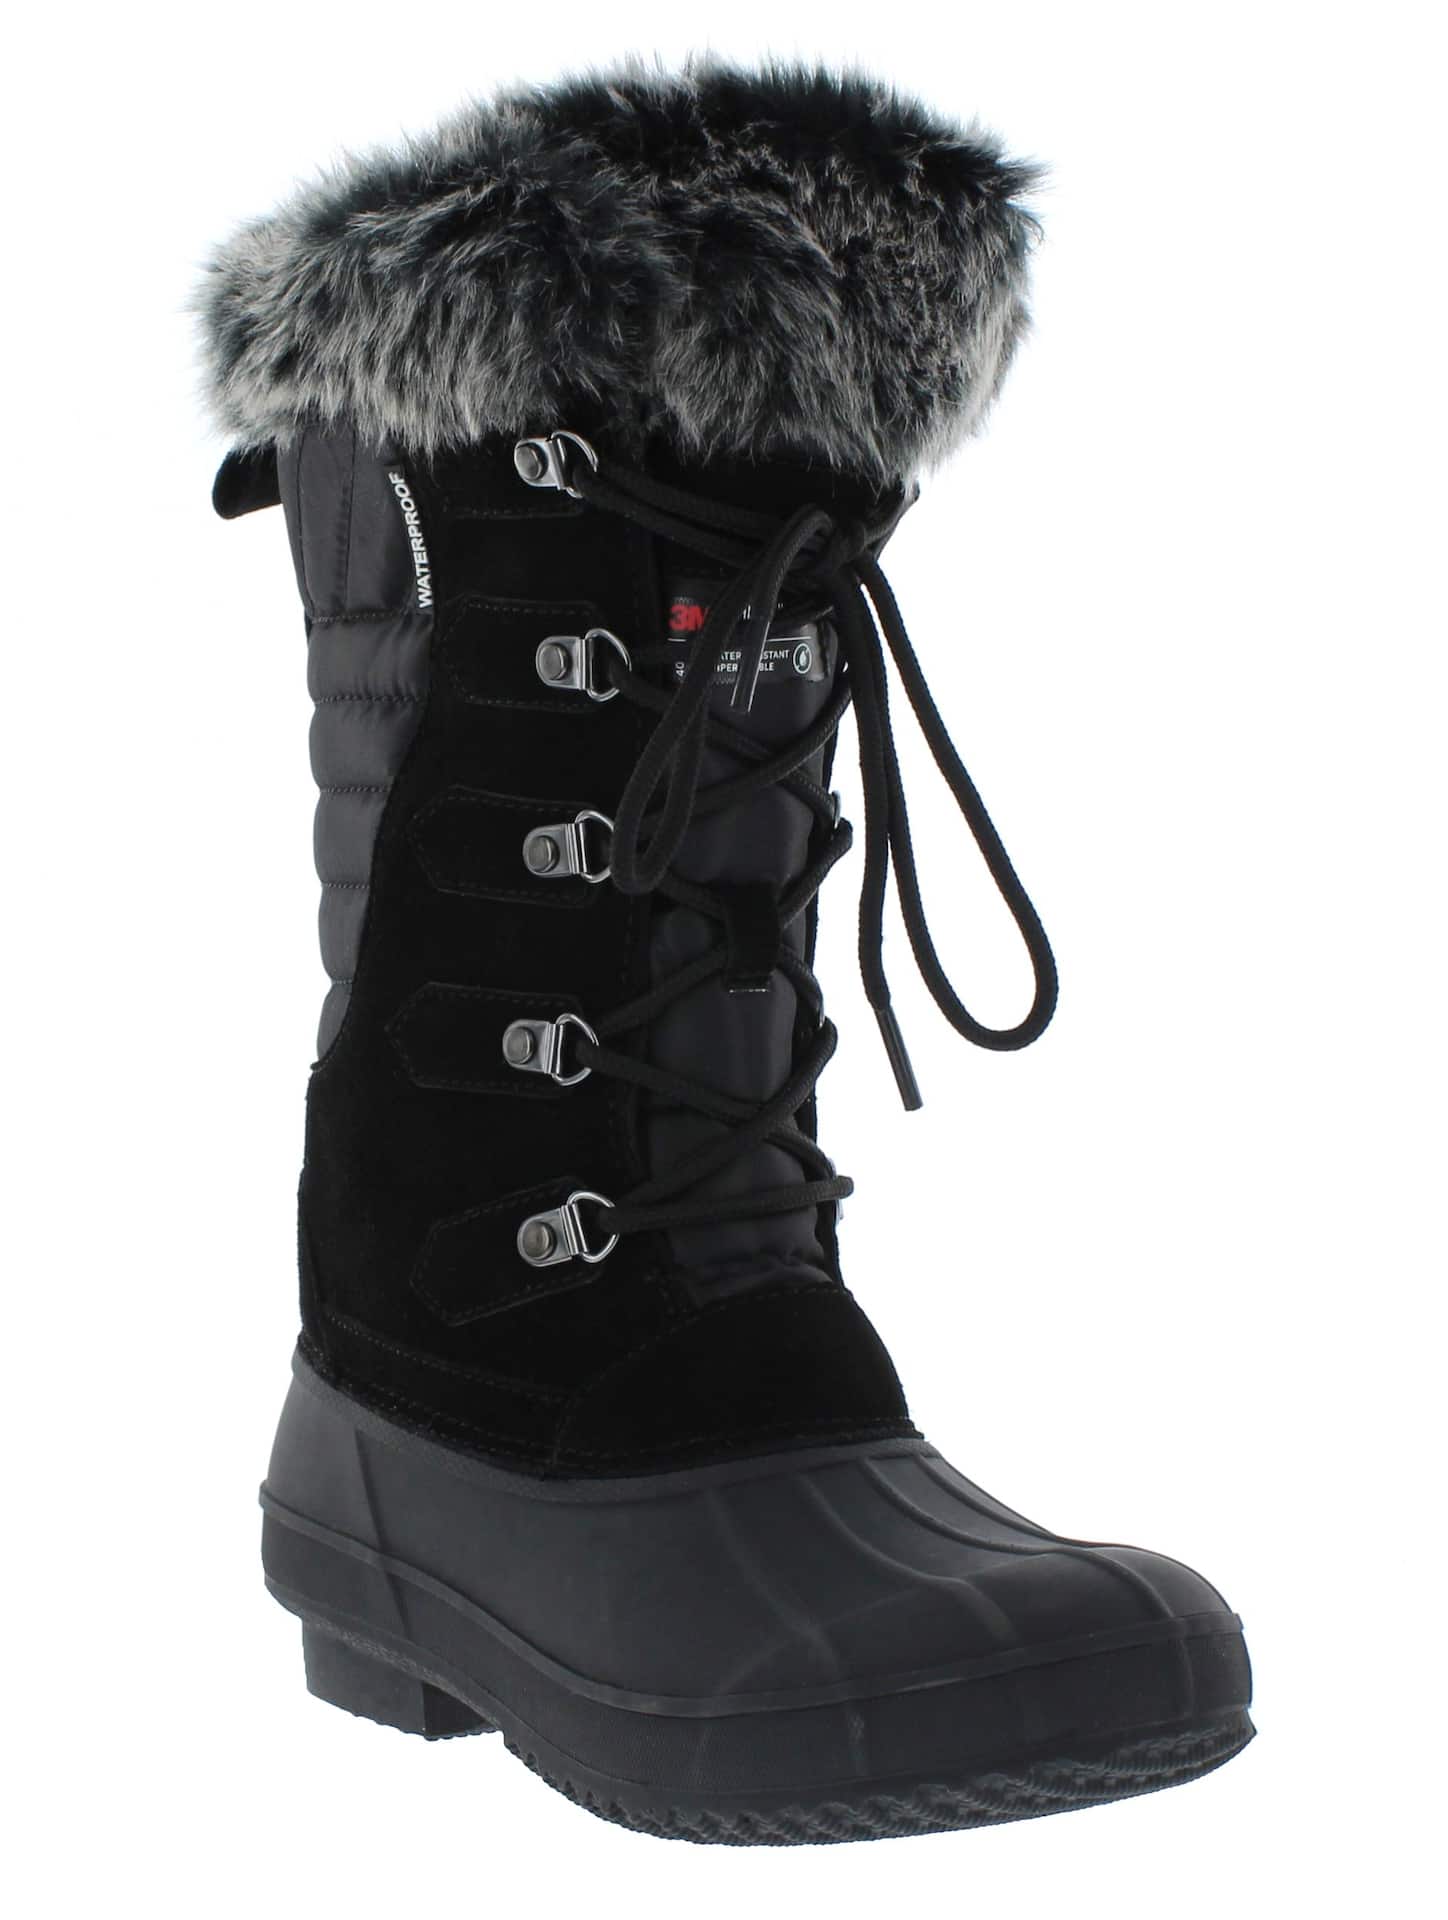 Outbound Women's Sorkin Insulated Leather/Rubber Winter Snow Boots